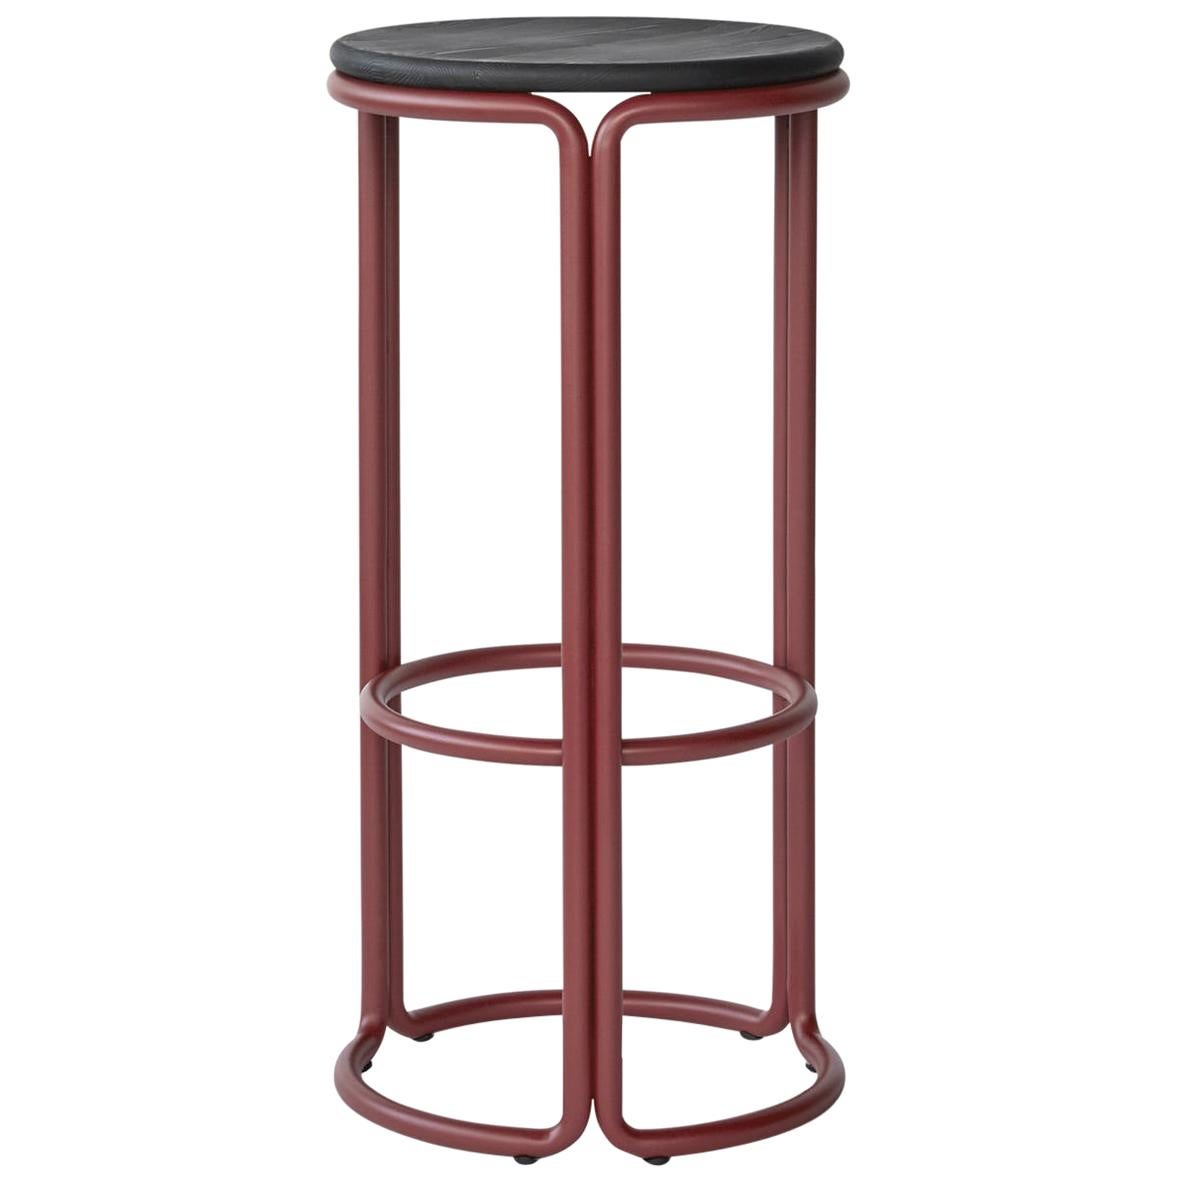 For Sale: Black (Painted Black Ash) Hardie Bar Stool with Wood Seat and Basque Red Steel Frame